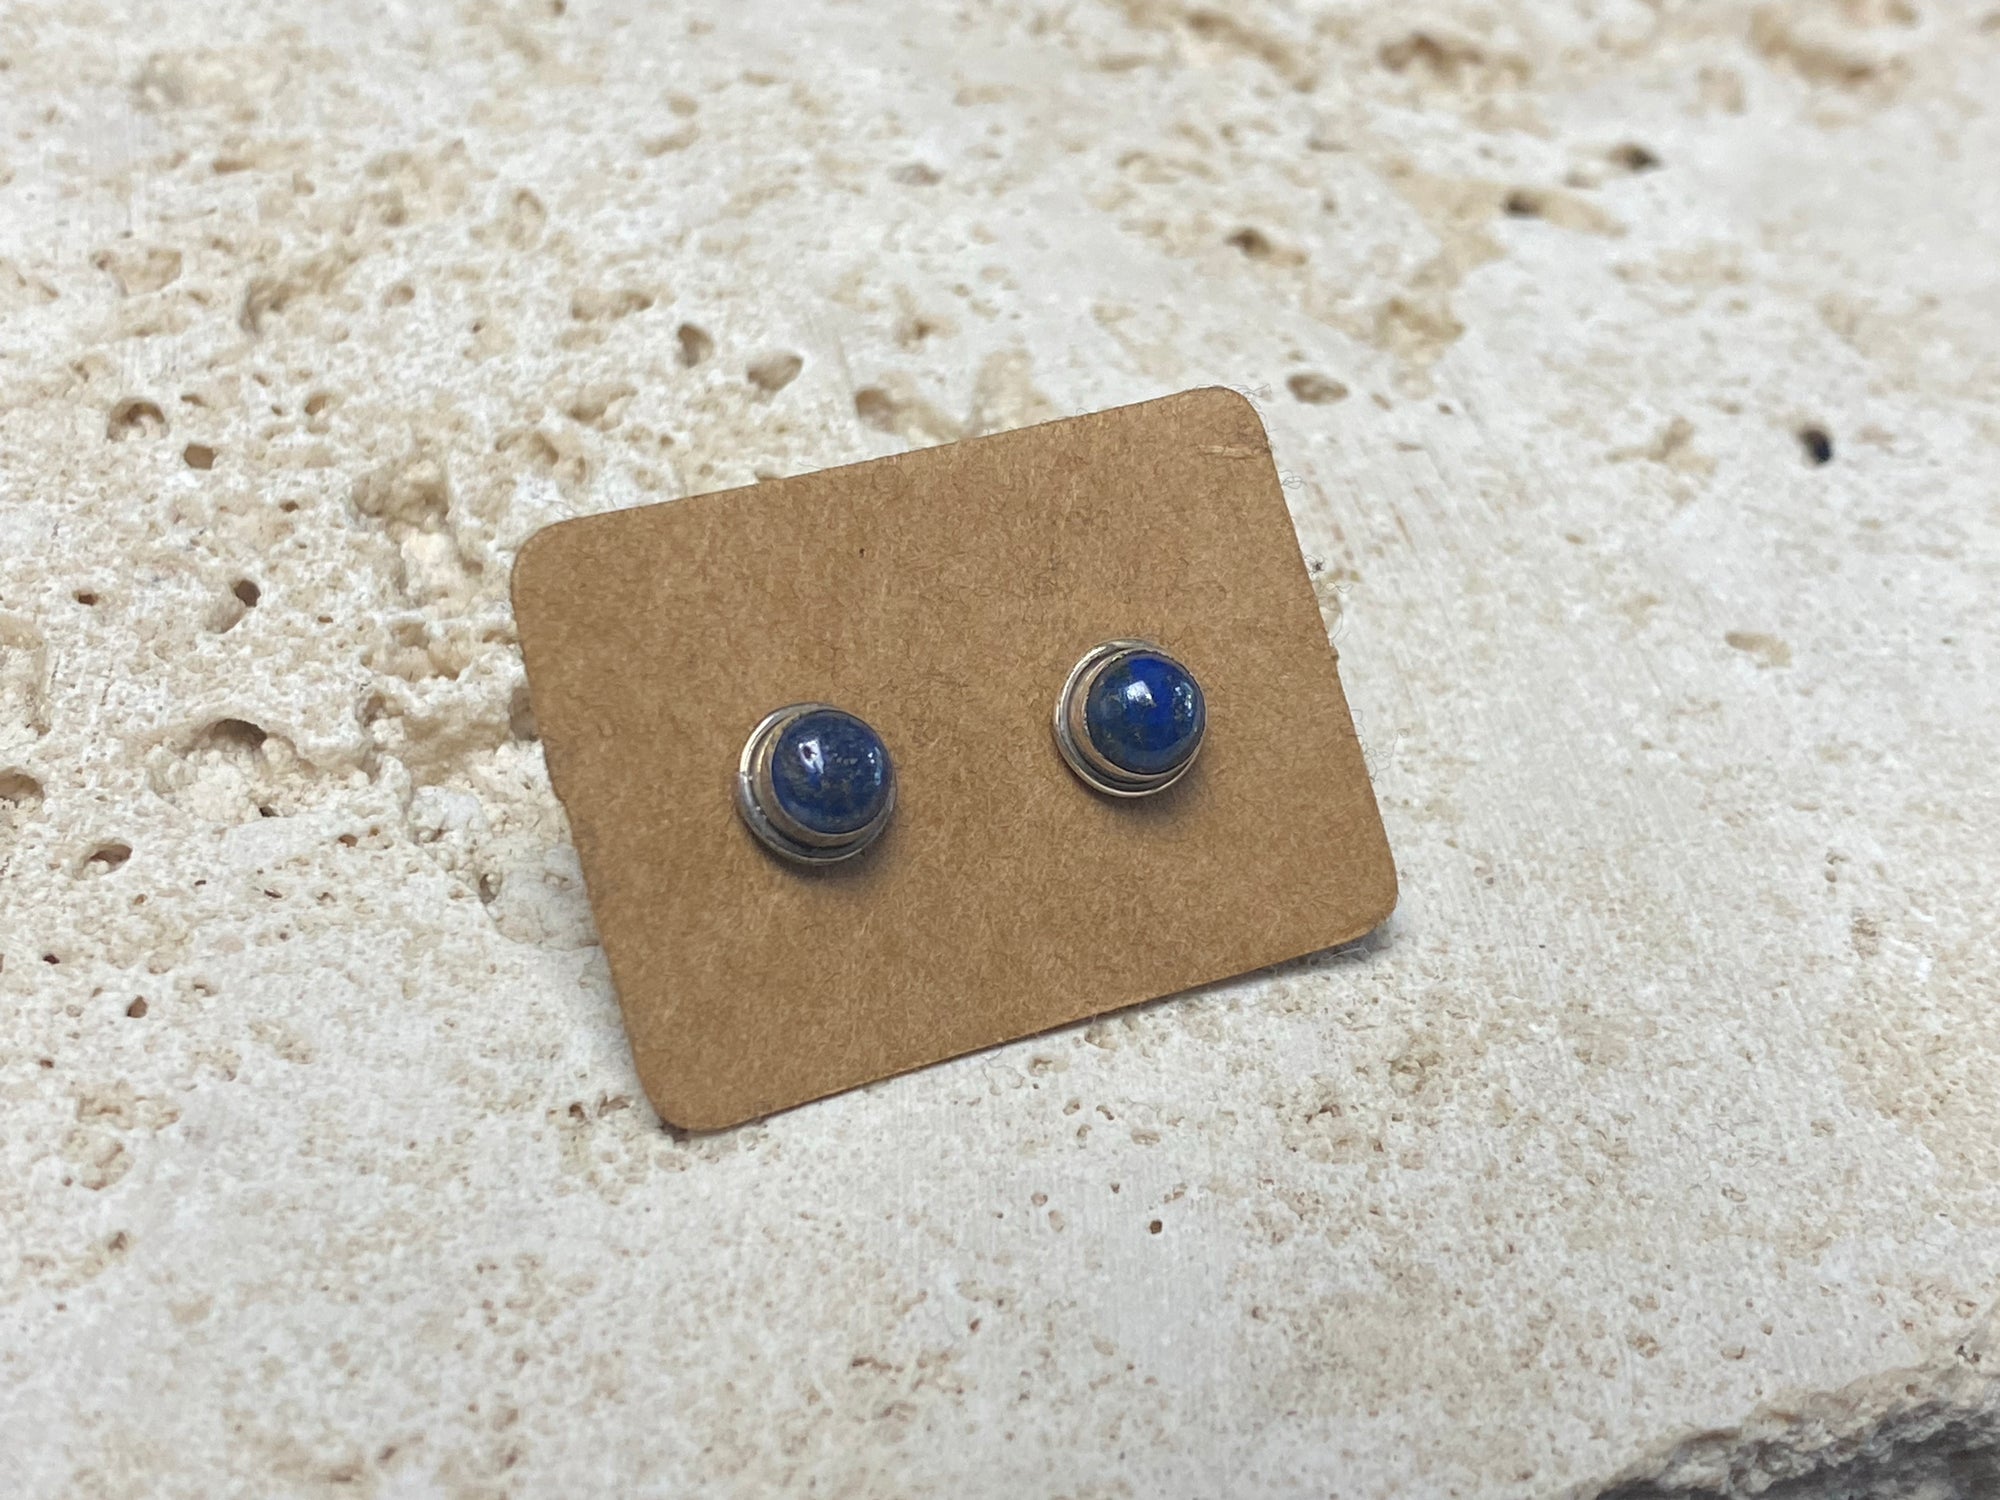 Simple and elegant, these small lapis lazuli earring studs are hand made from sterling silver and set with lapis cabochons